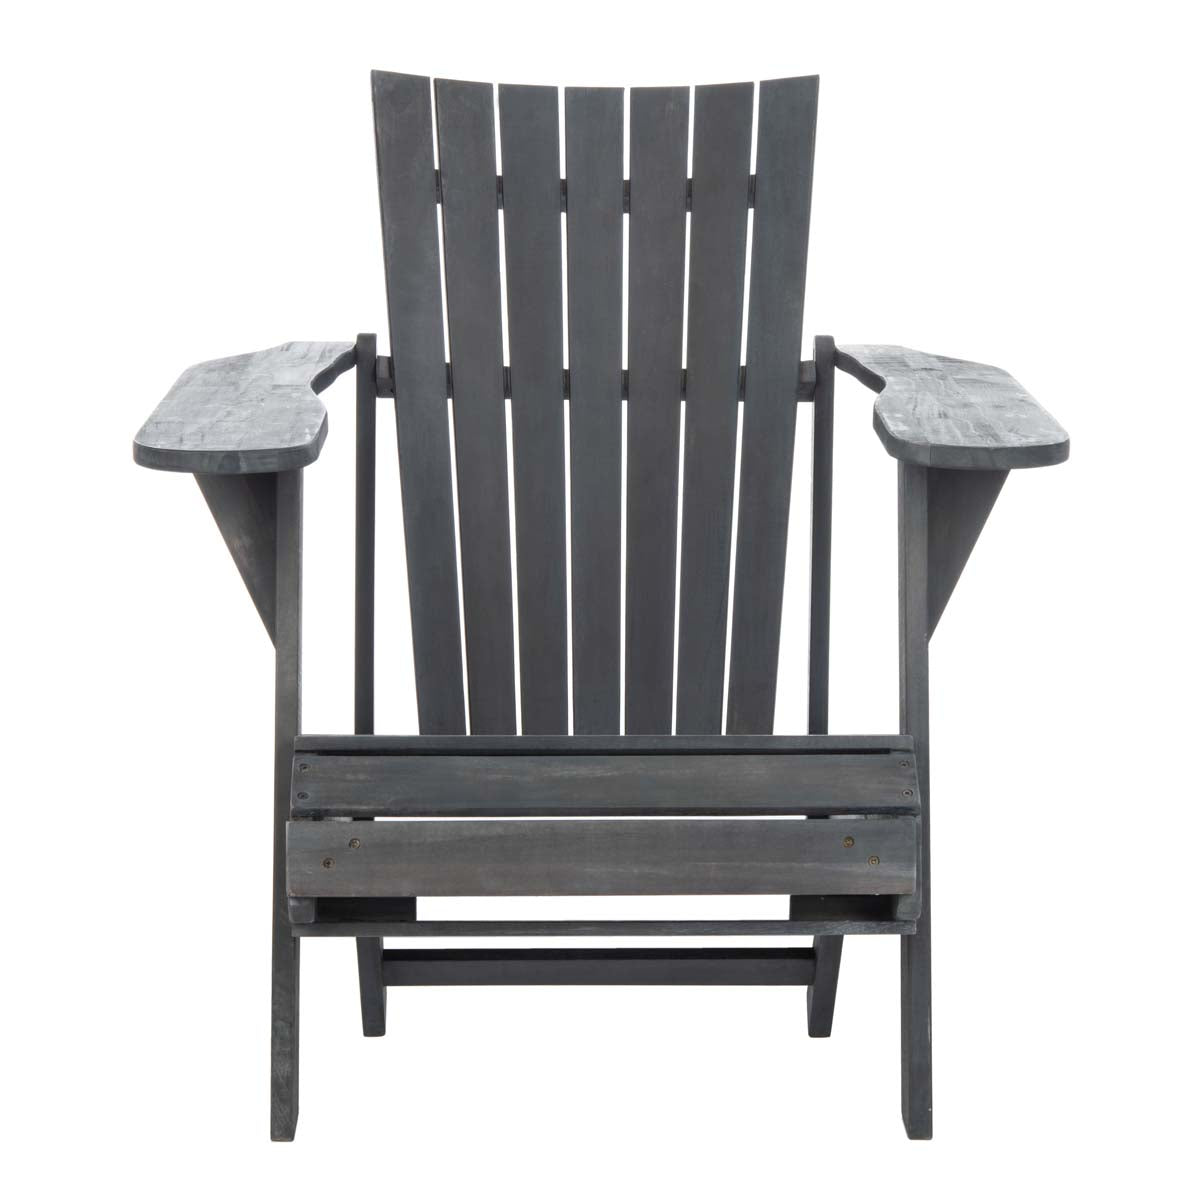 Safavieh Merlin Adirondack Chair With Retractable Footrest , PAT6760